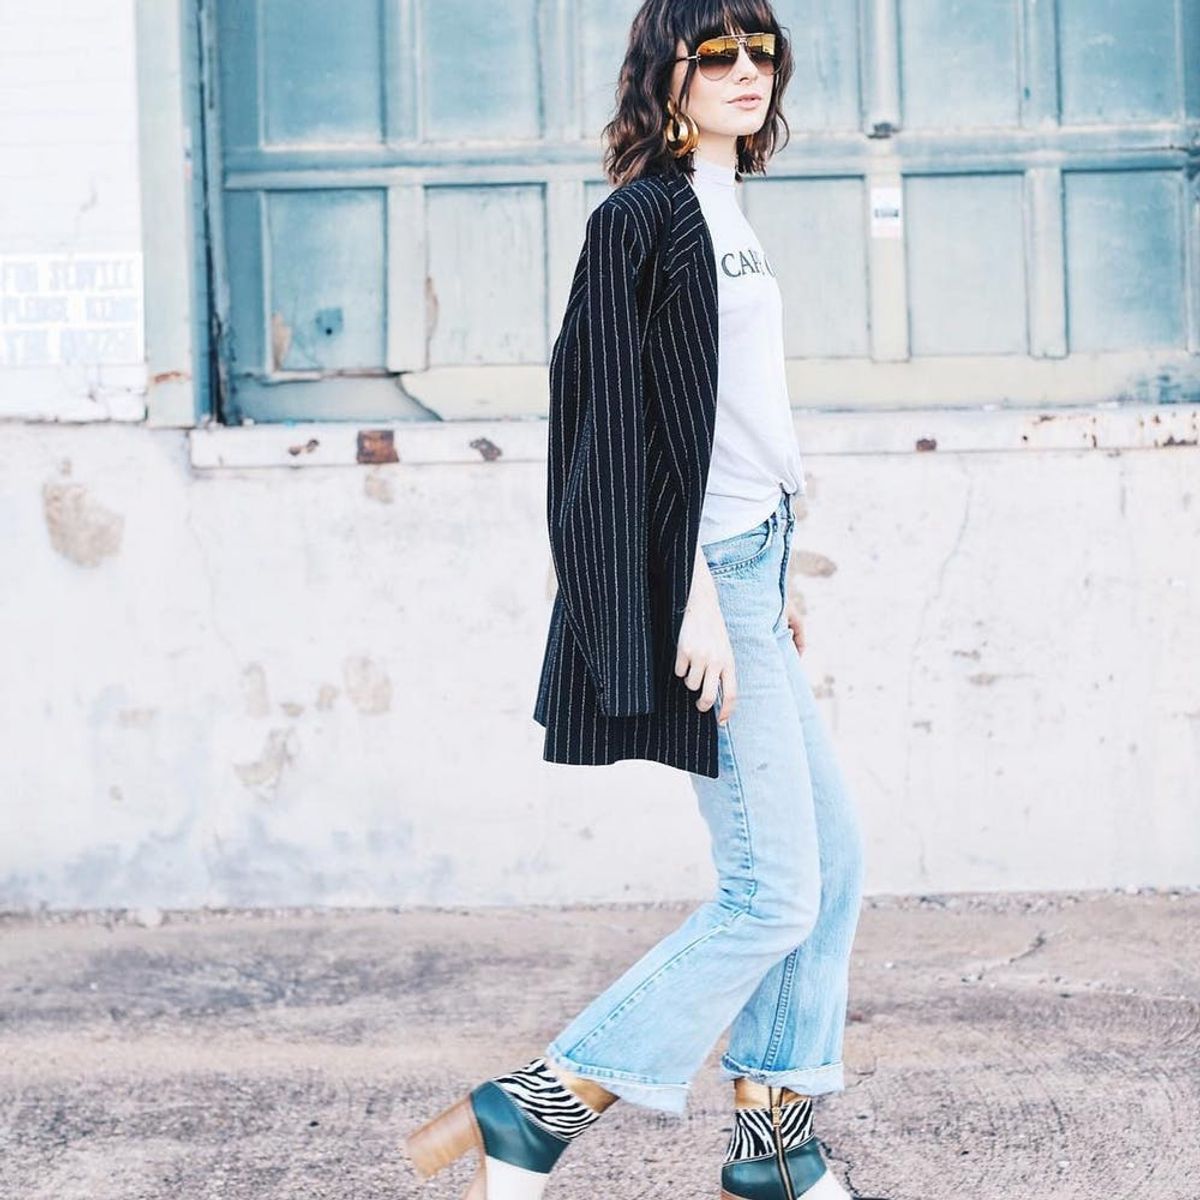 17 Insta-Babe-Approved Fall Outfits to Start Wearing Now